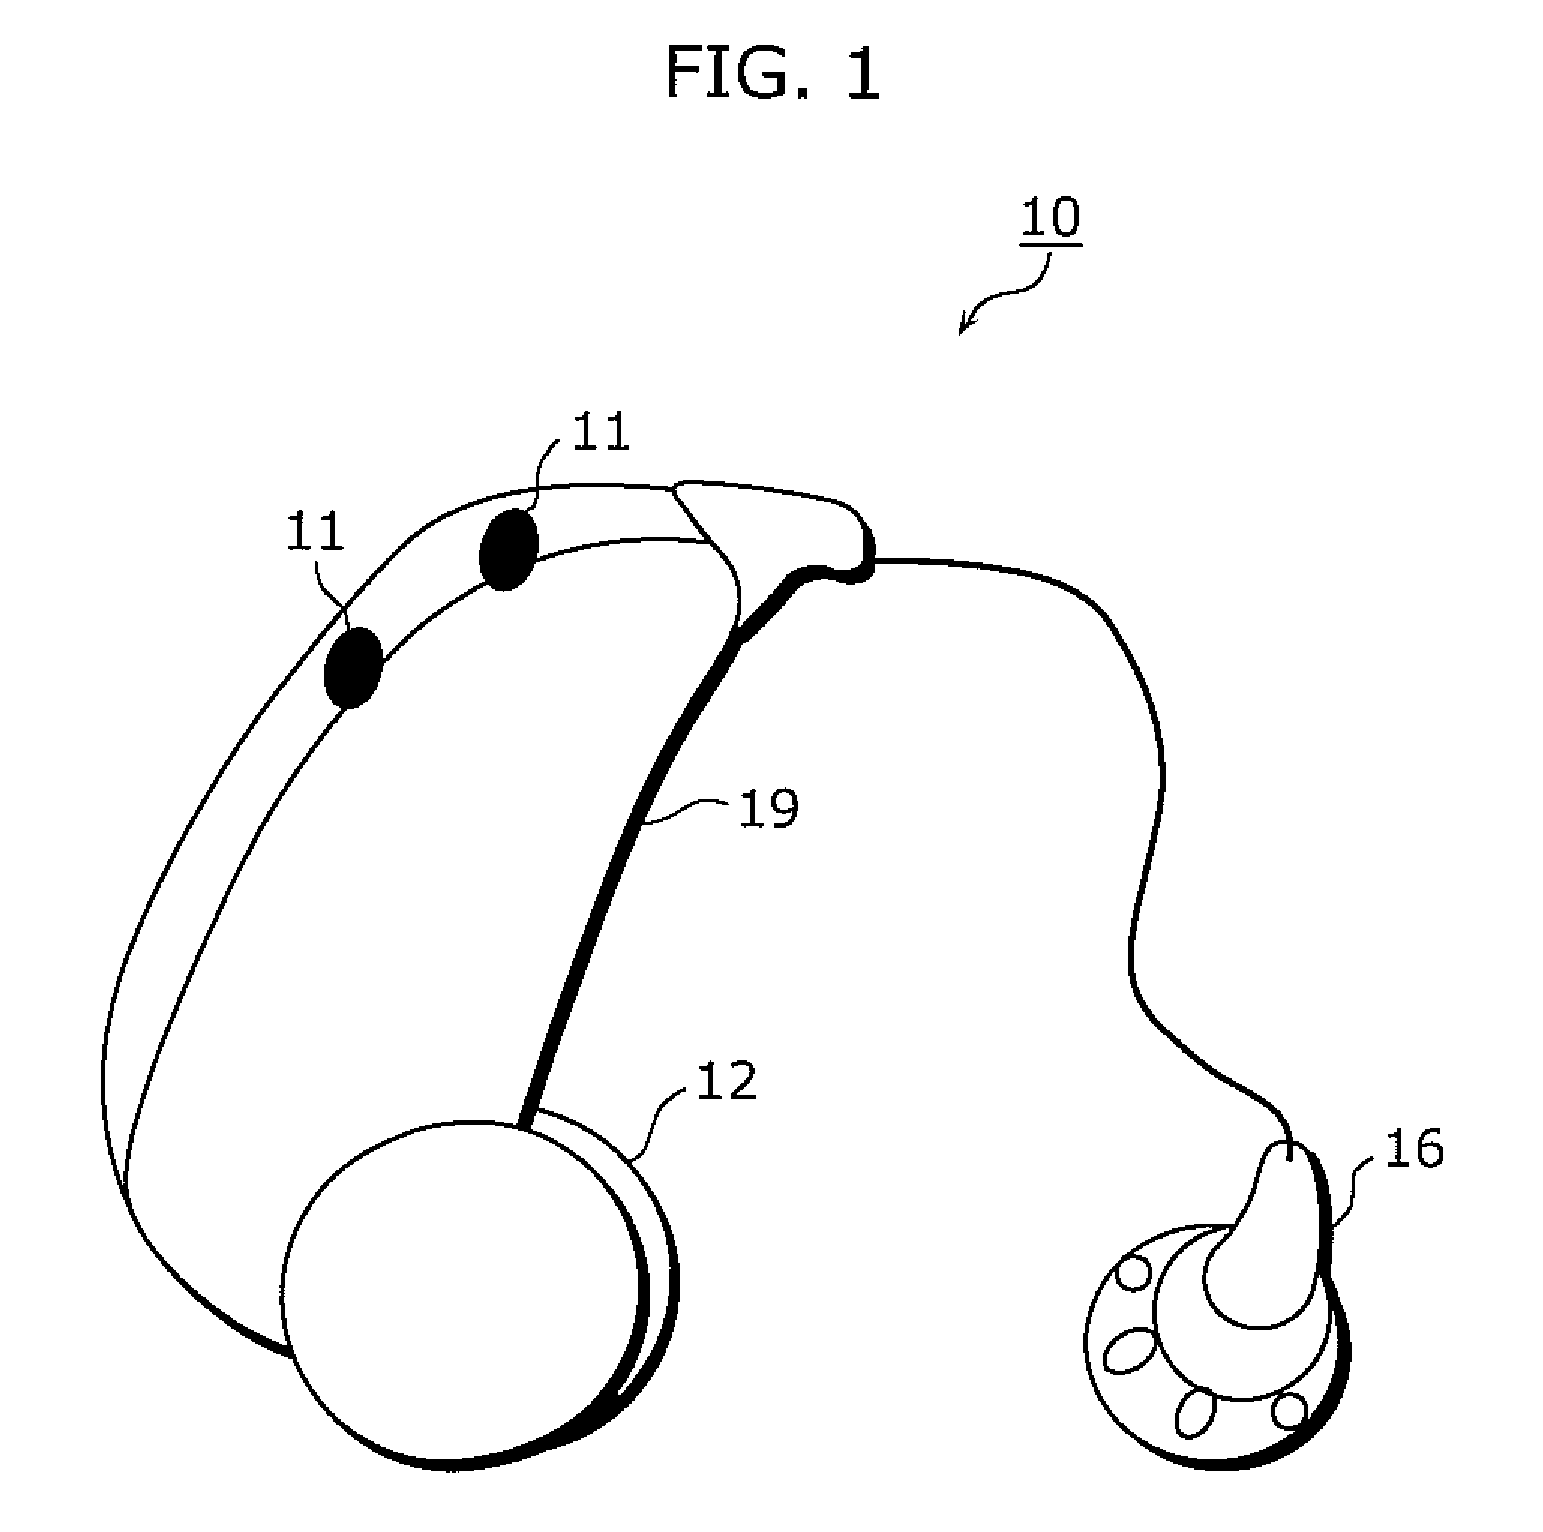 Hearing aid, and hearing-aid processing method and integrated circuit for hearing aid